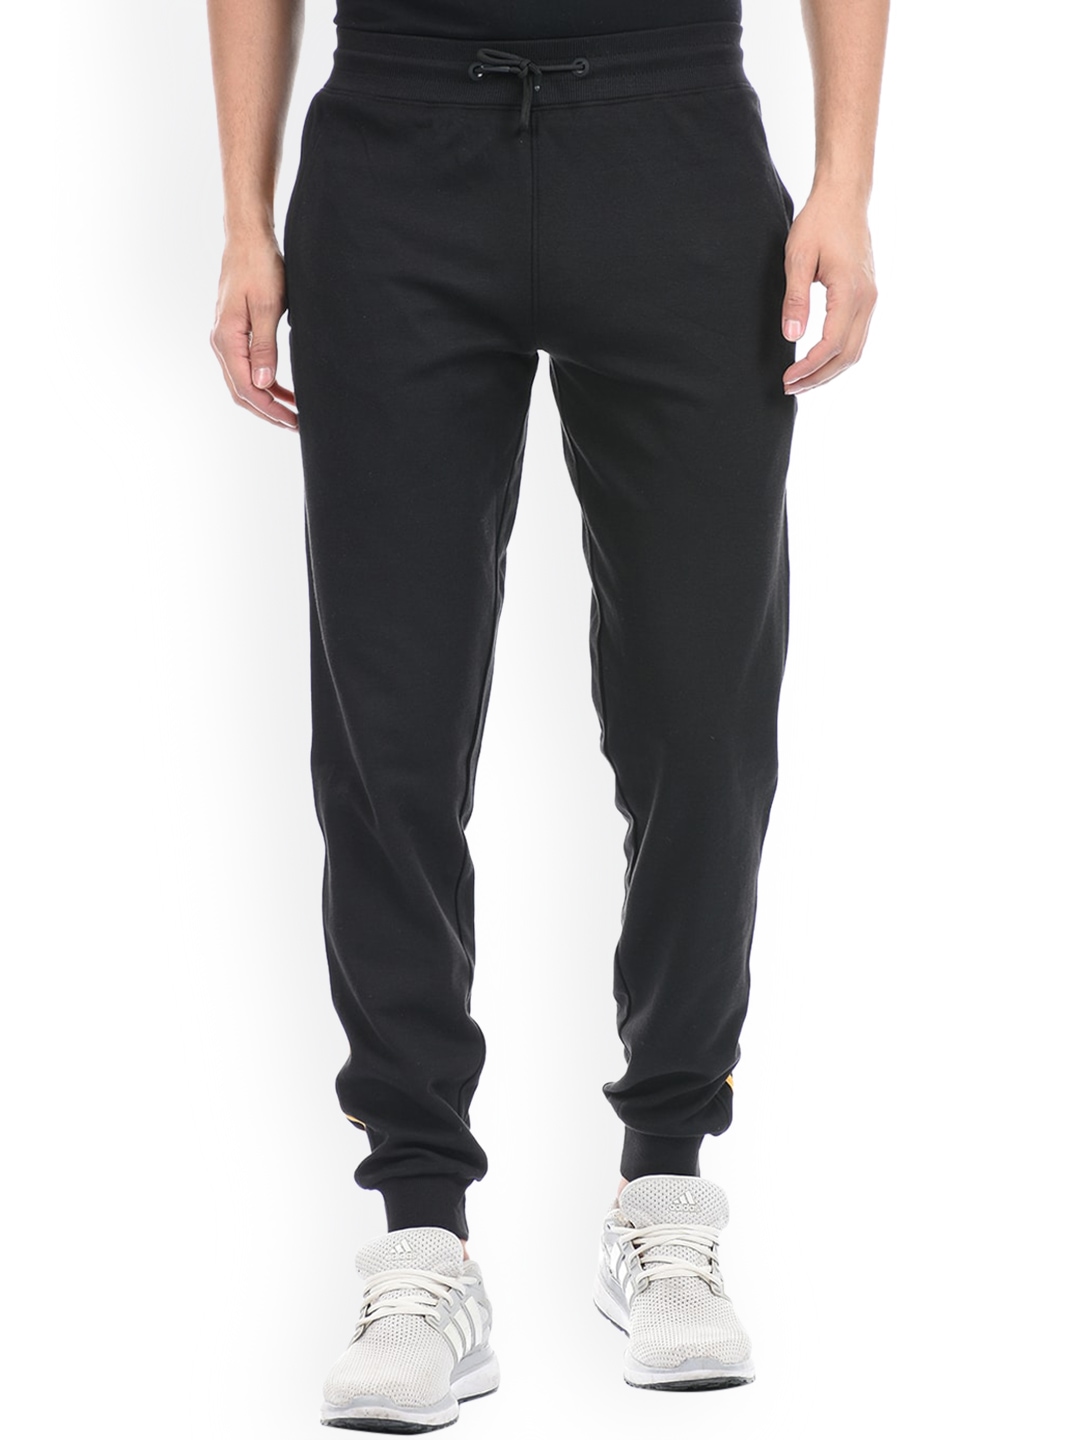 ONEWAY Men Black Solid Cotton Joggers - buy at the price of $6.07 in ...